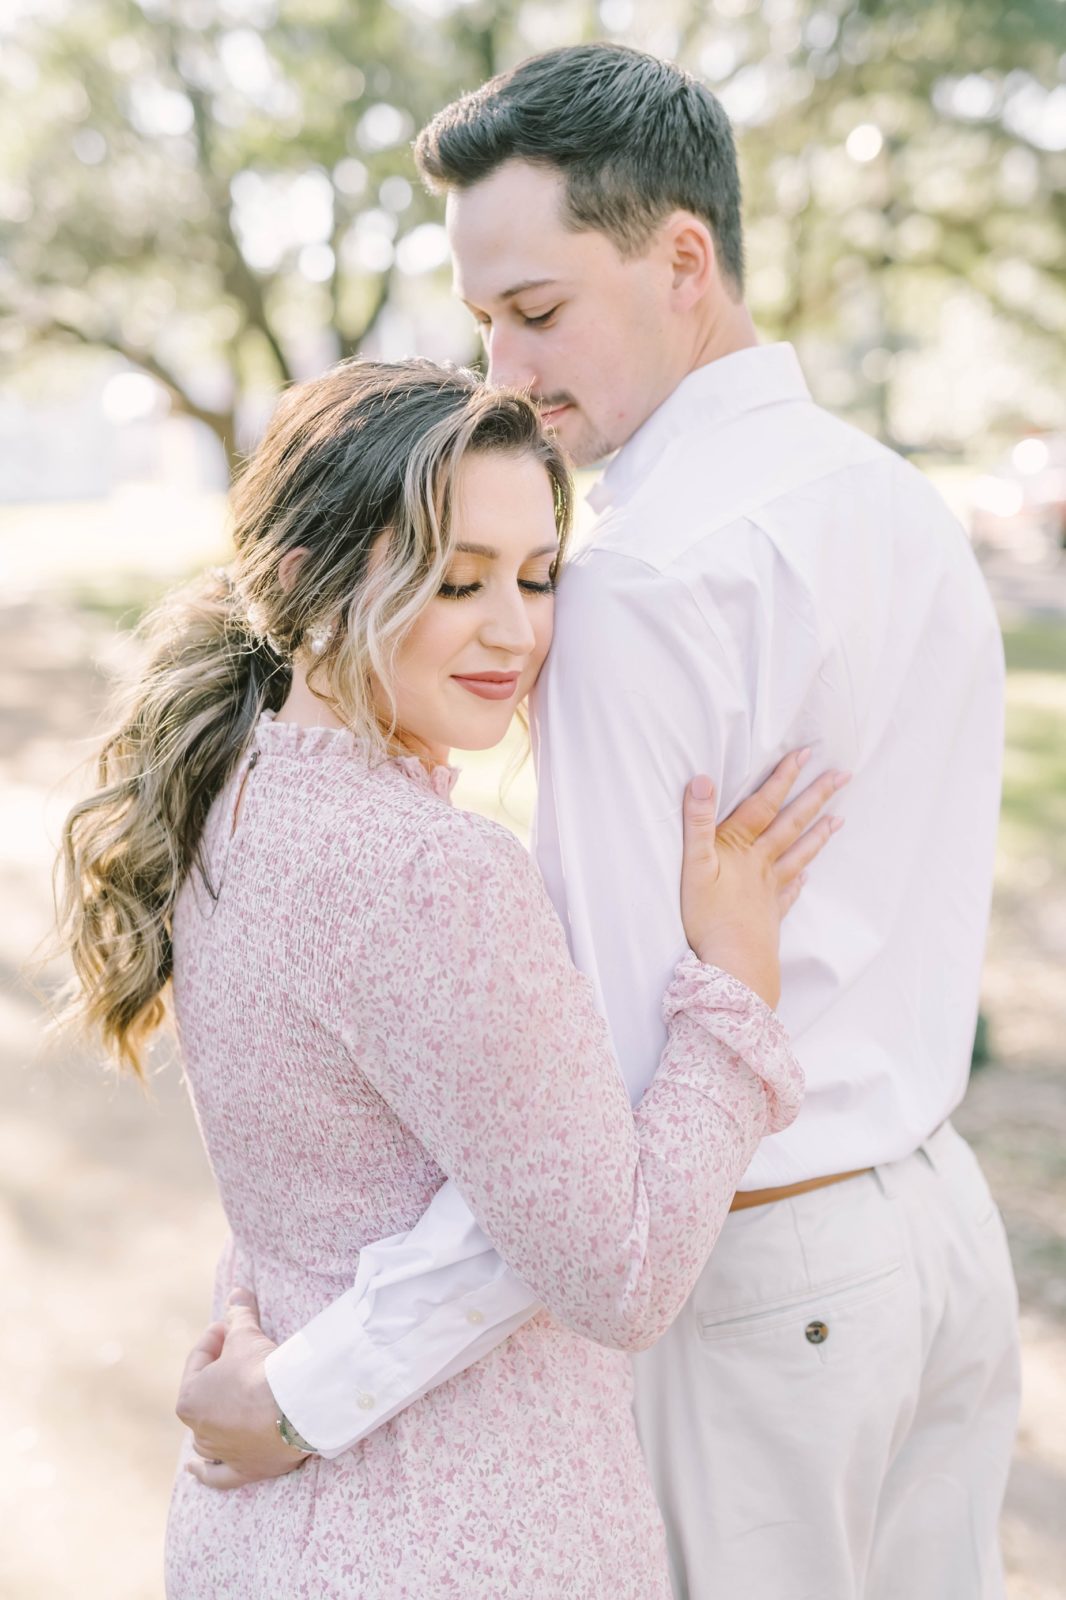 Wearing a pink floral dress in the summer sunlight a woman holds onto her fiance by Christina Elliott Photography. pink dress #christinaelliottphotography #Houstonengagements #riceuniversity #springengagements #sayIdo #Houstonengagementphotographers